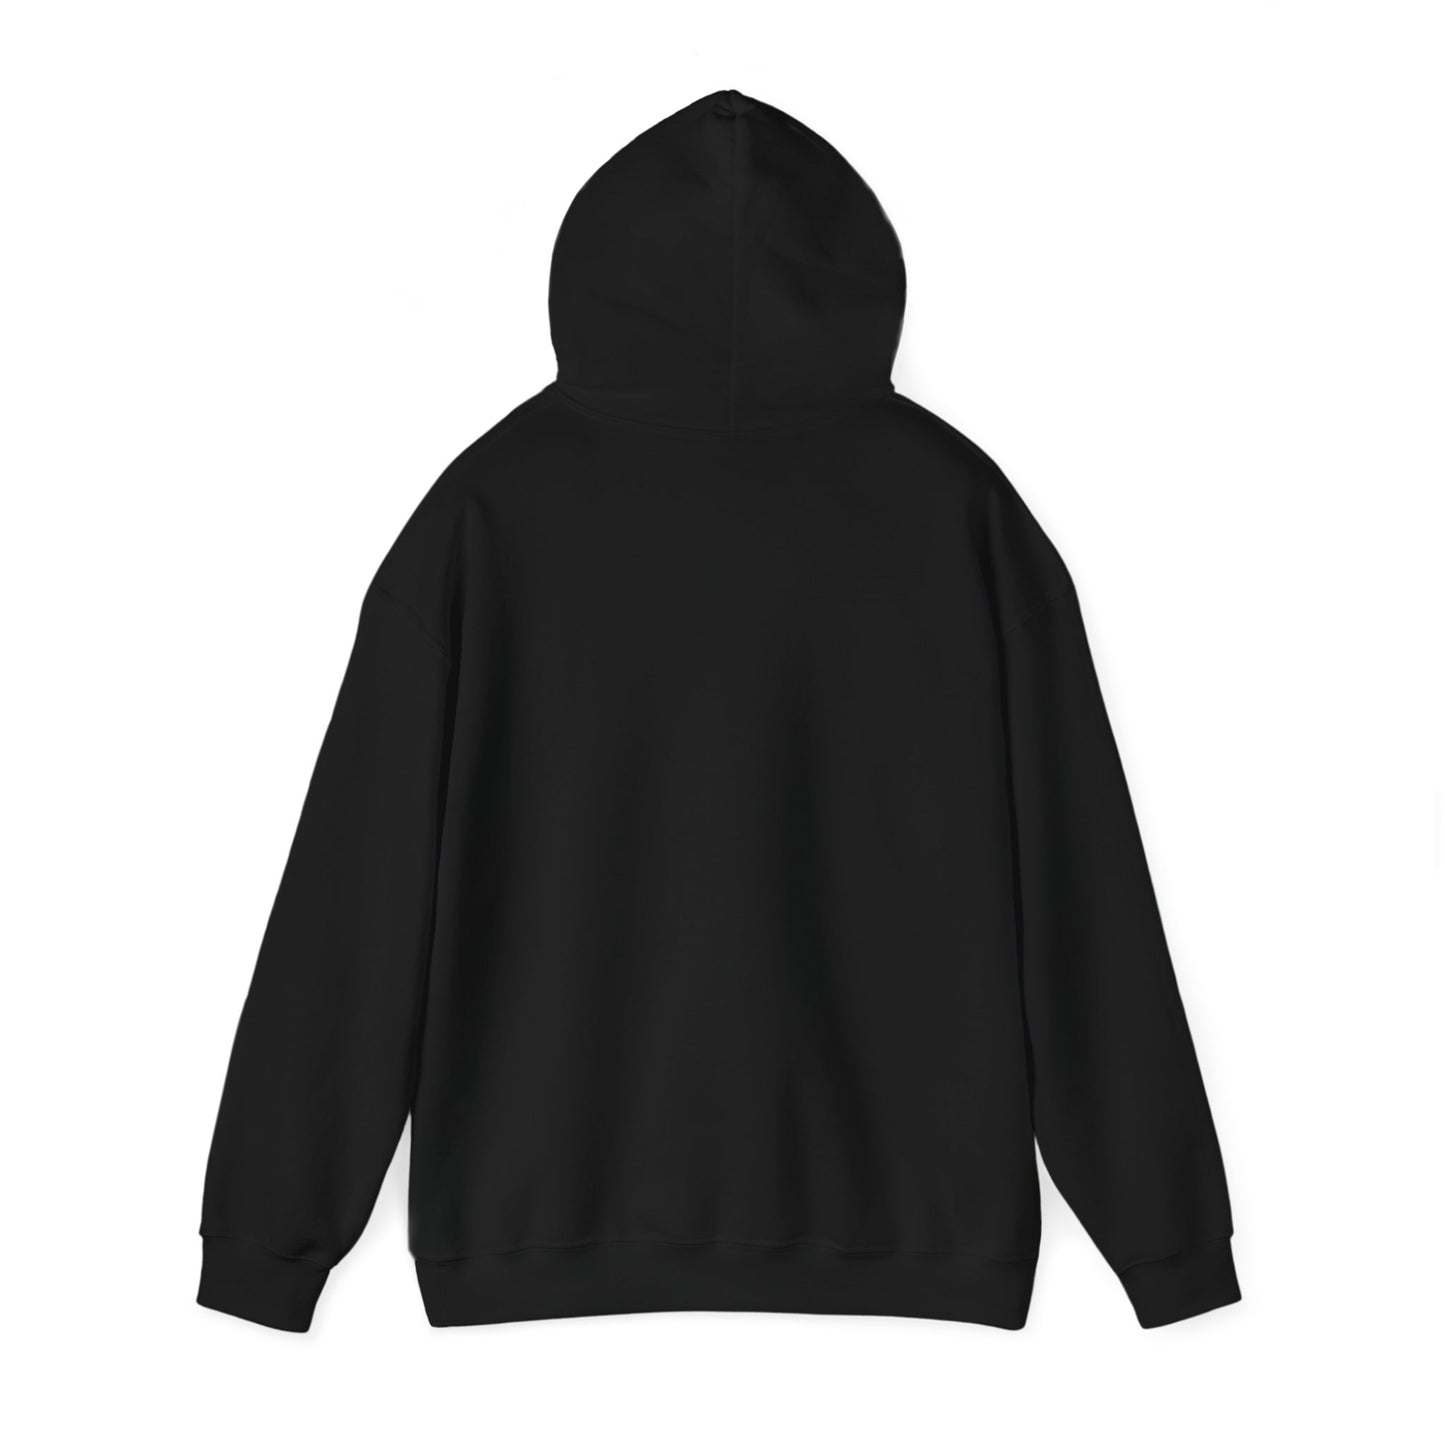 Journey to the magical world Unisex Hoodie